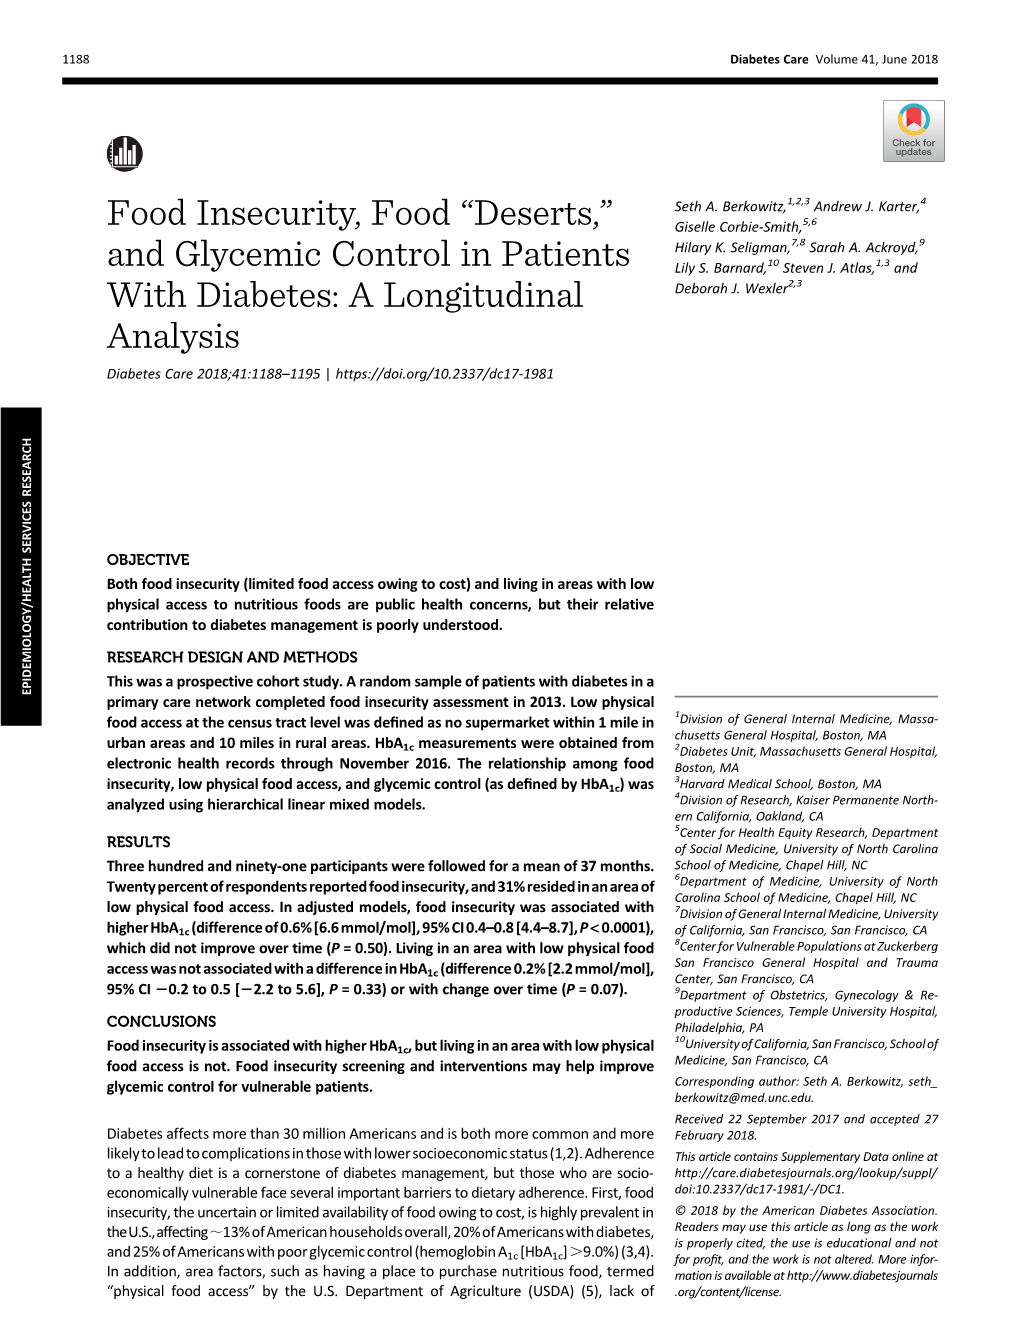 Food Insecurity, Food “Deserts,” and Glycemic Control in Patients With